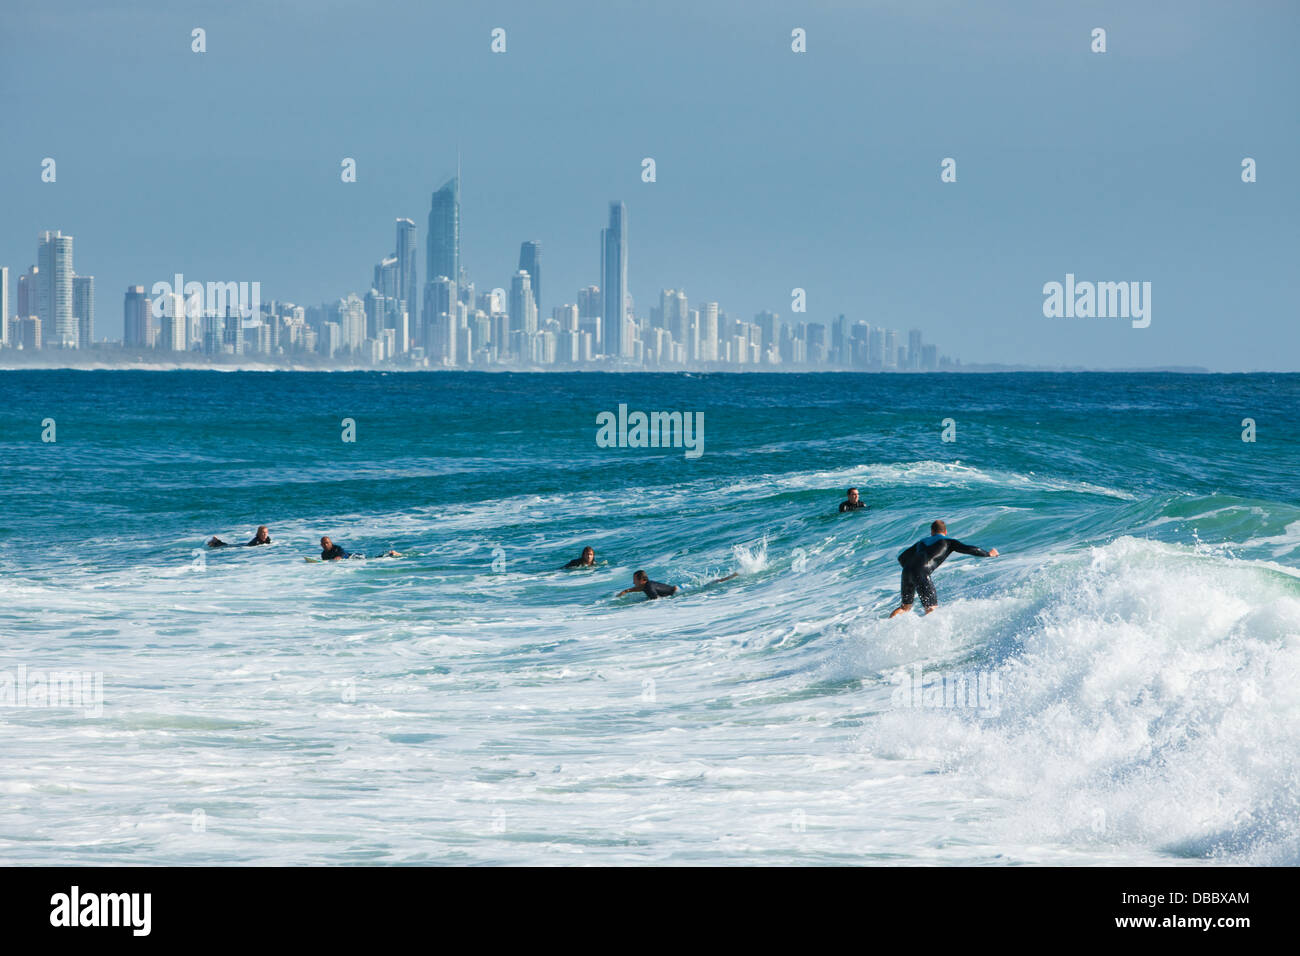 Surfer riding a wave with Surfers Paradise skyline in background. Burleigh Heads, Gold Coast, Queensland, Australia Stock Photo